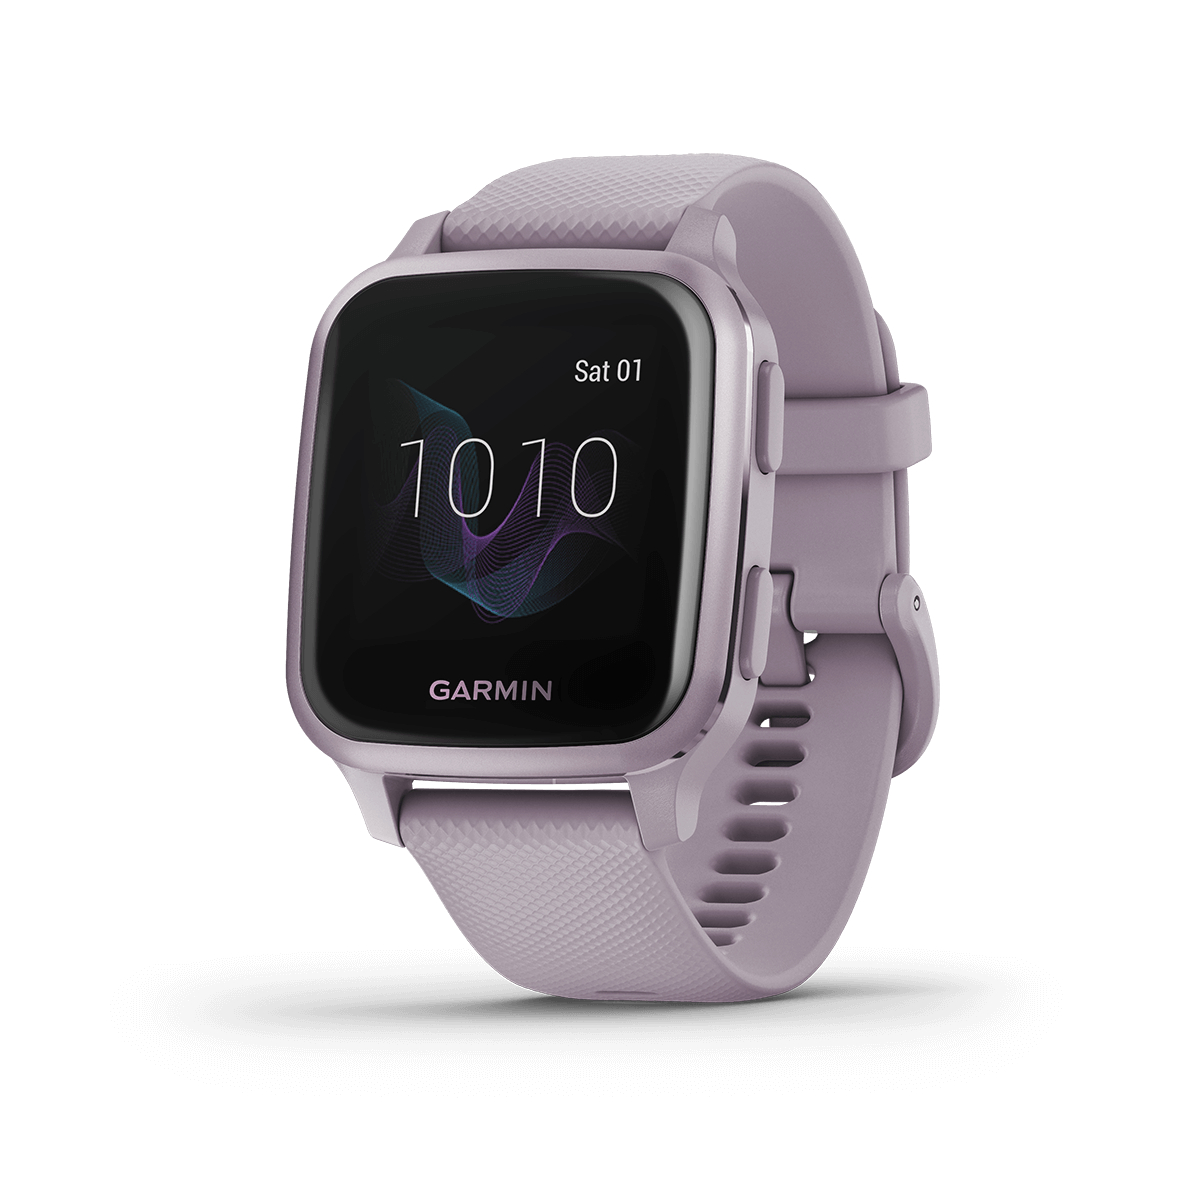 Garmin Garmin Venu Square,GPS Smartwatch with Bright Touchscreen Display, Features Music and Up to 6 Days of Battery Life, (Orchid/Metallic Orchid)